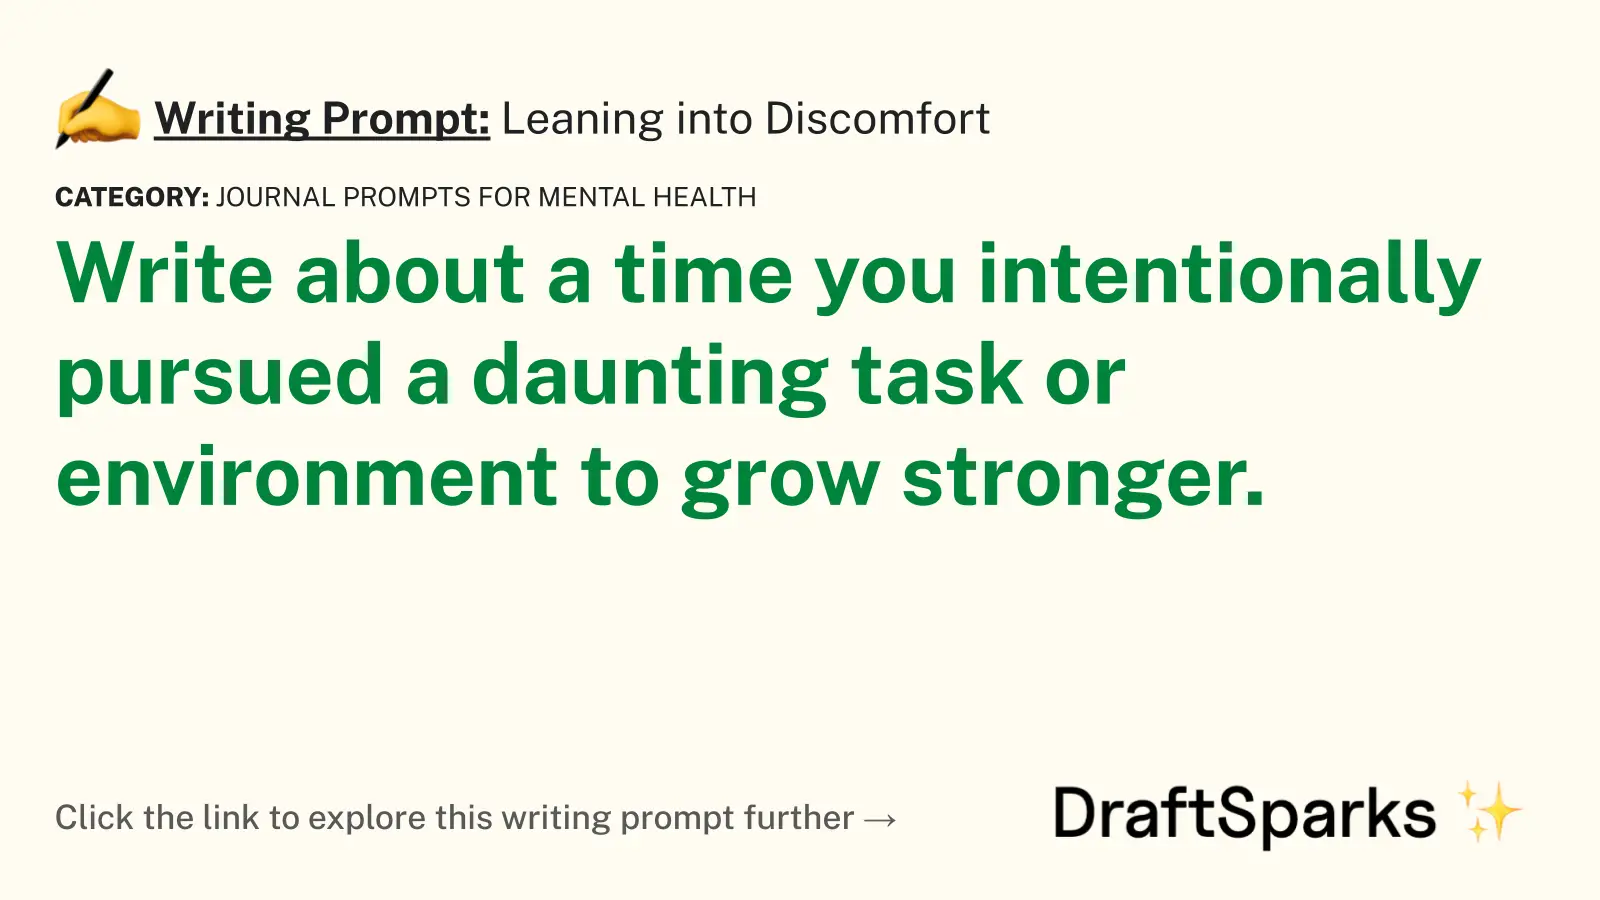 Leaning into Discomfort